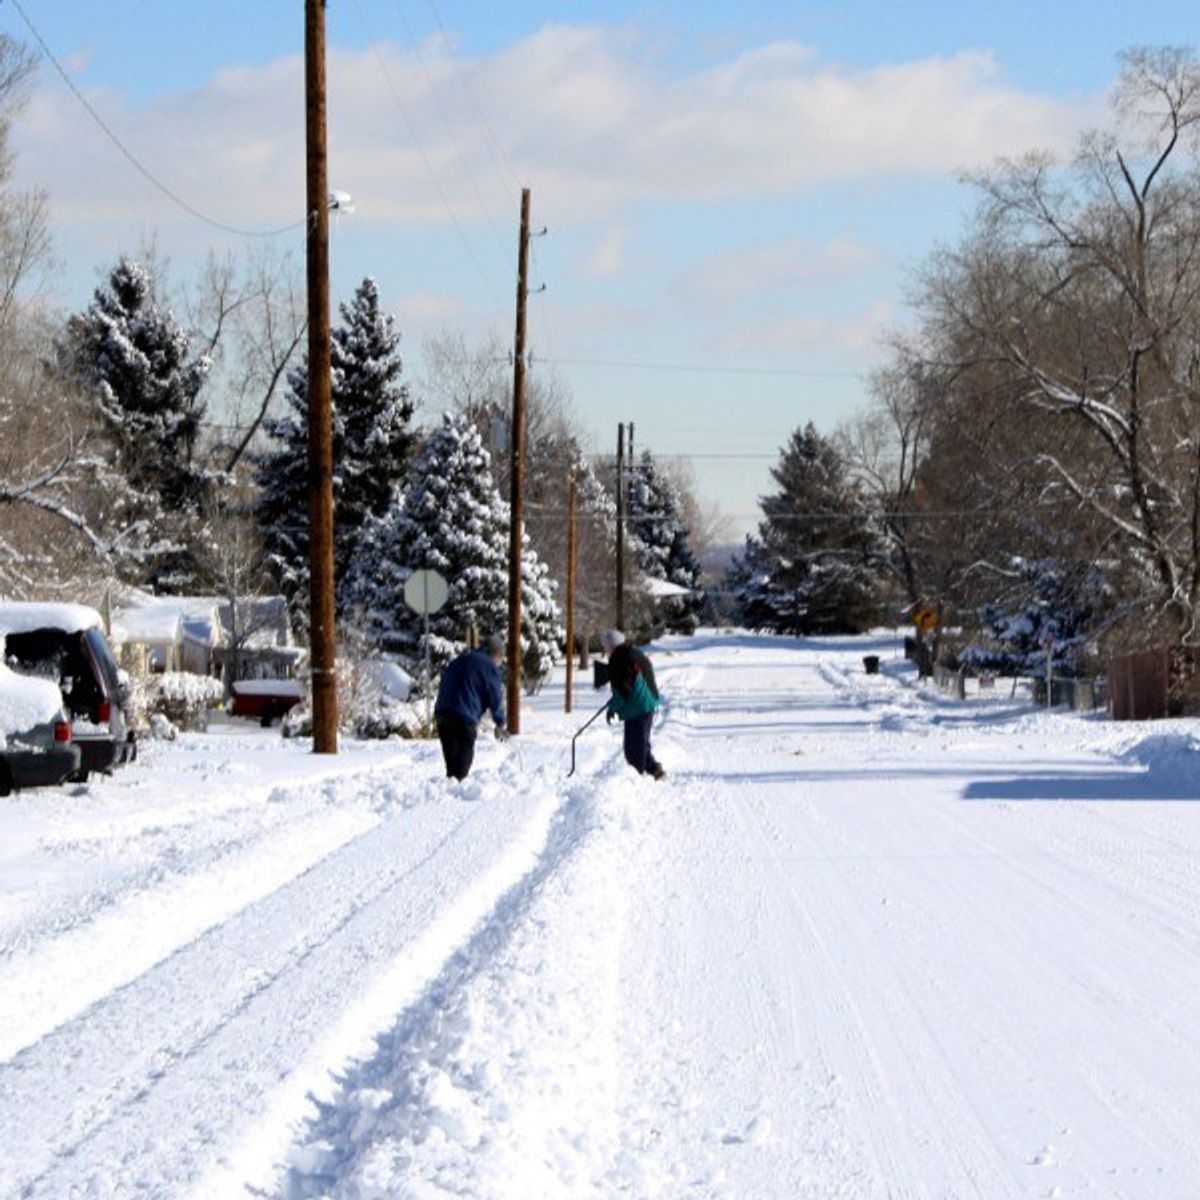 5 Ways To Have The Best Snow Day Ever